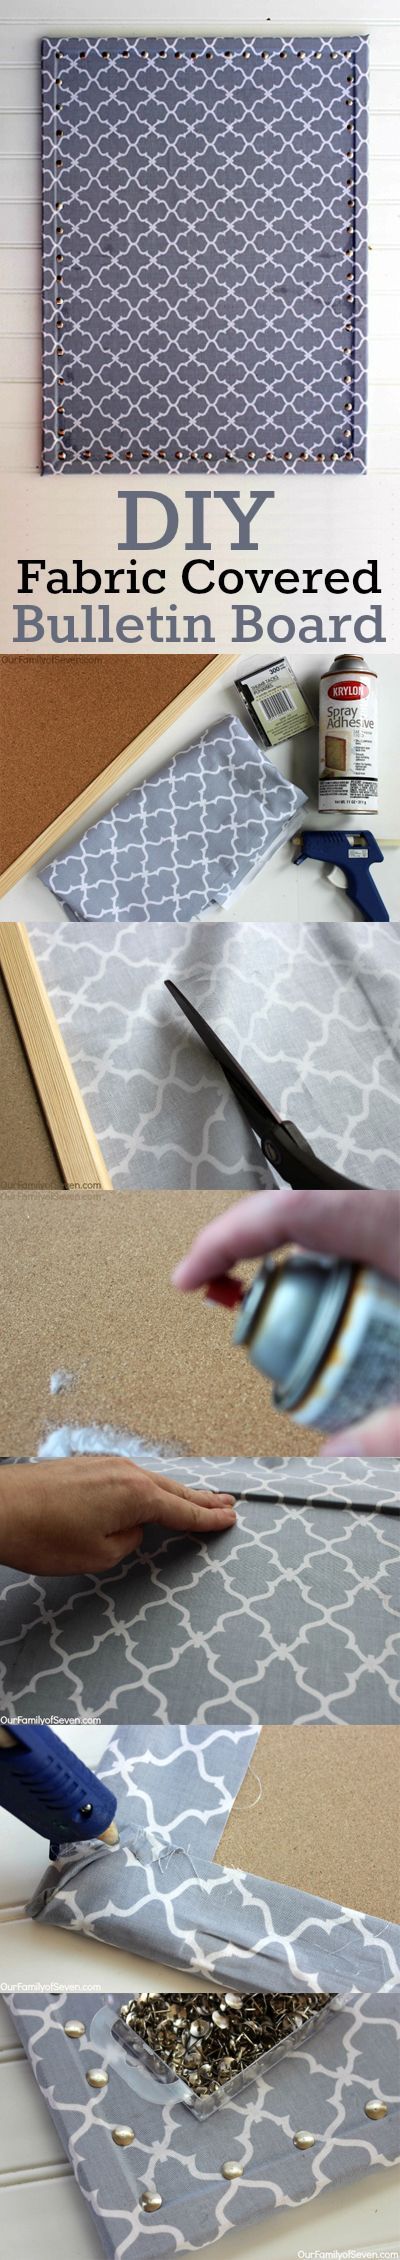 Fabric Covered Bulletin Board- Super Easy and Super Inexpensive home decor project.